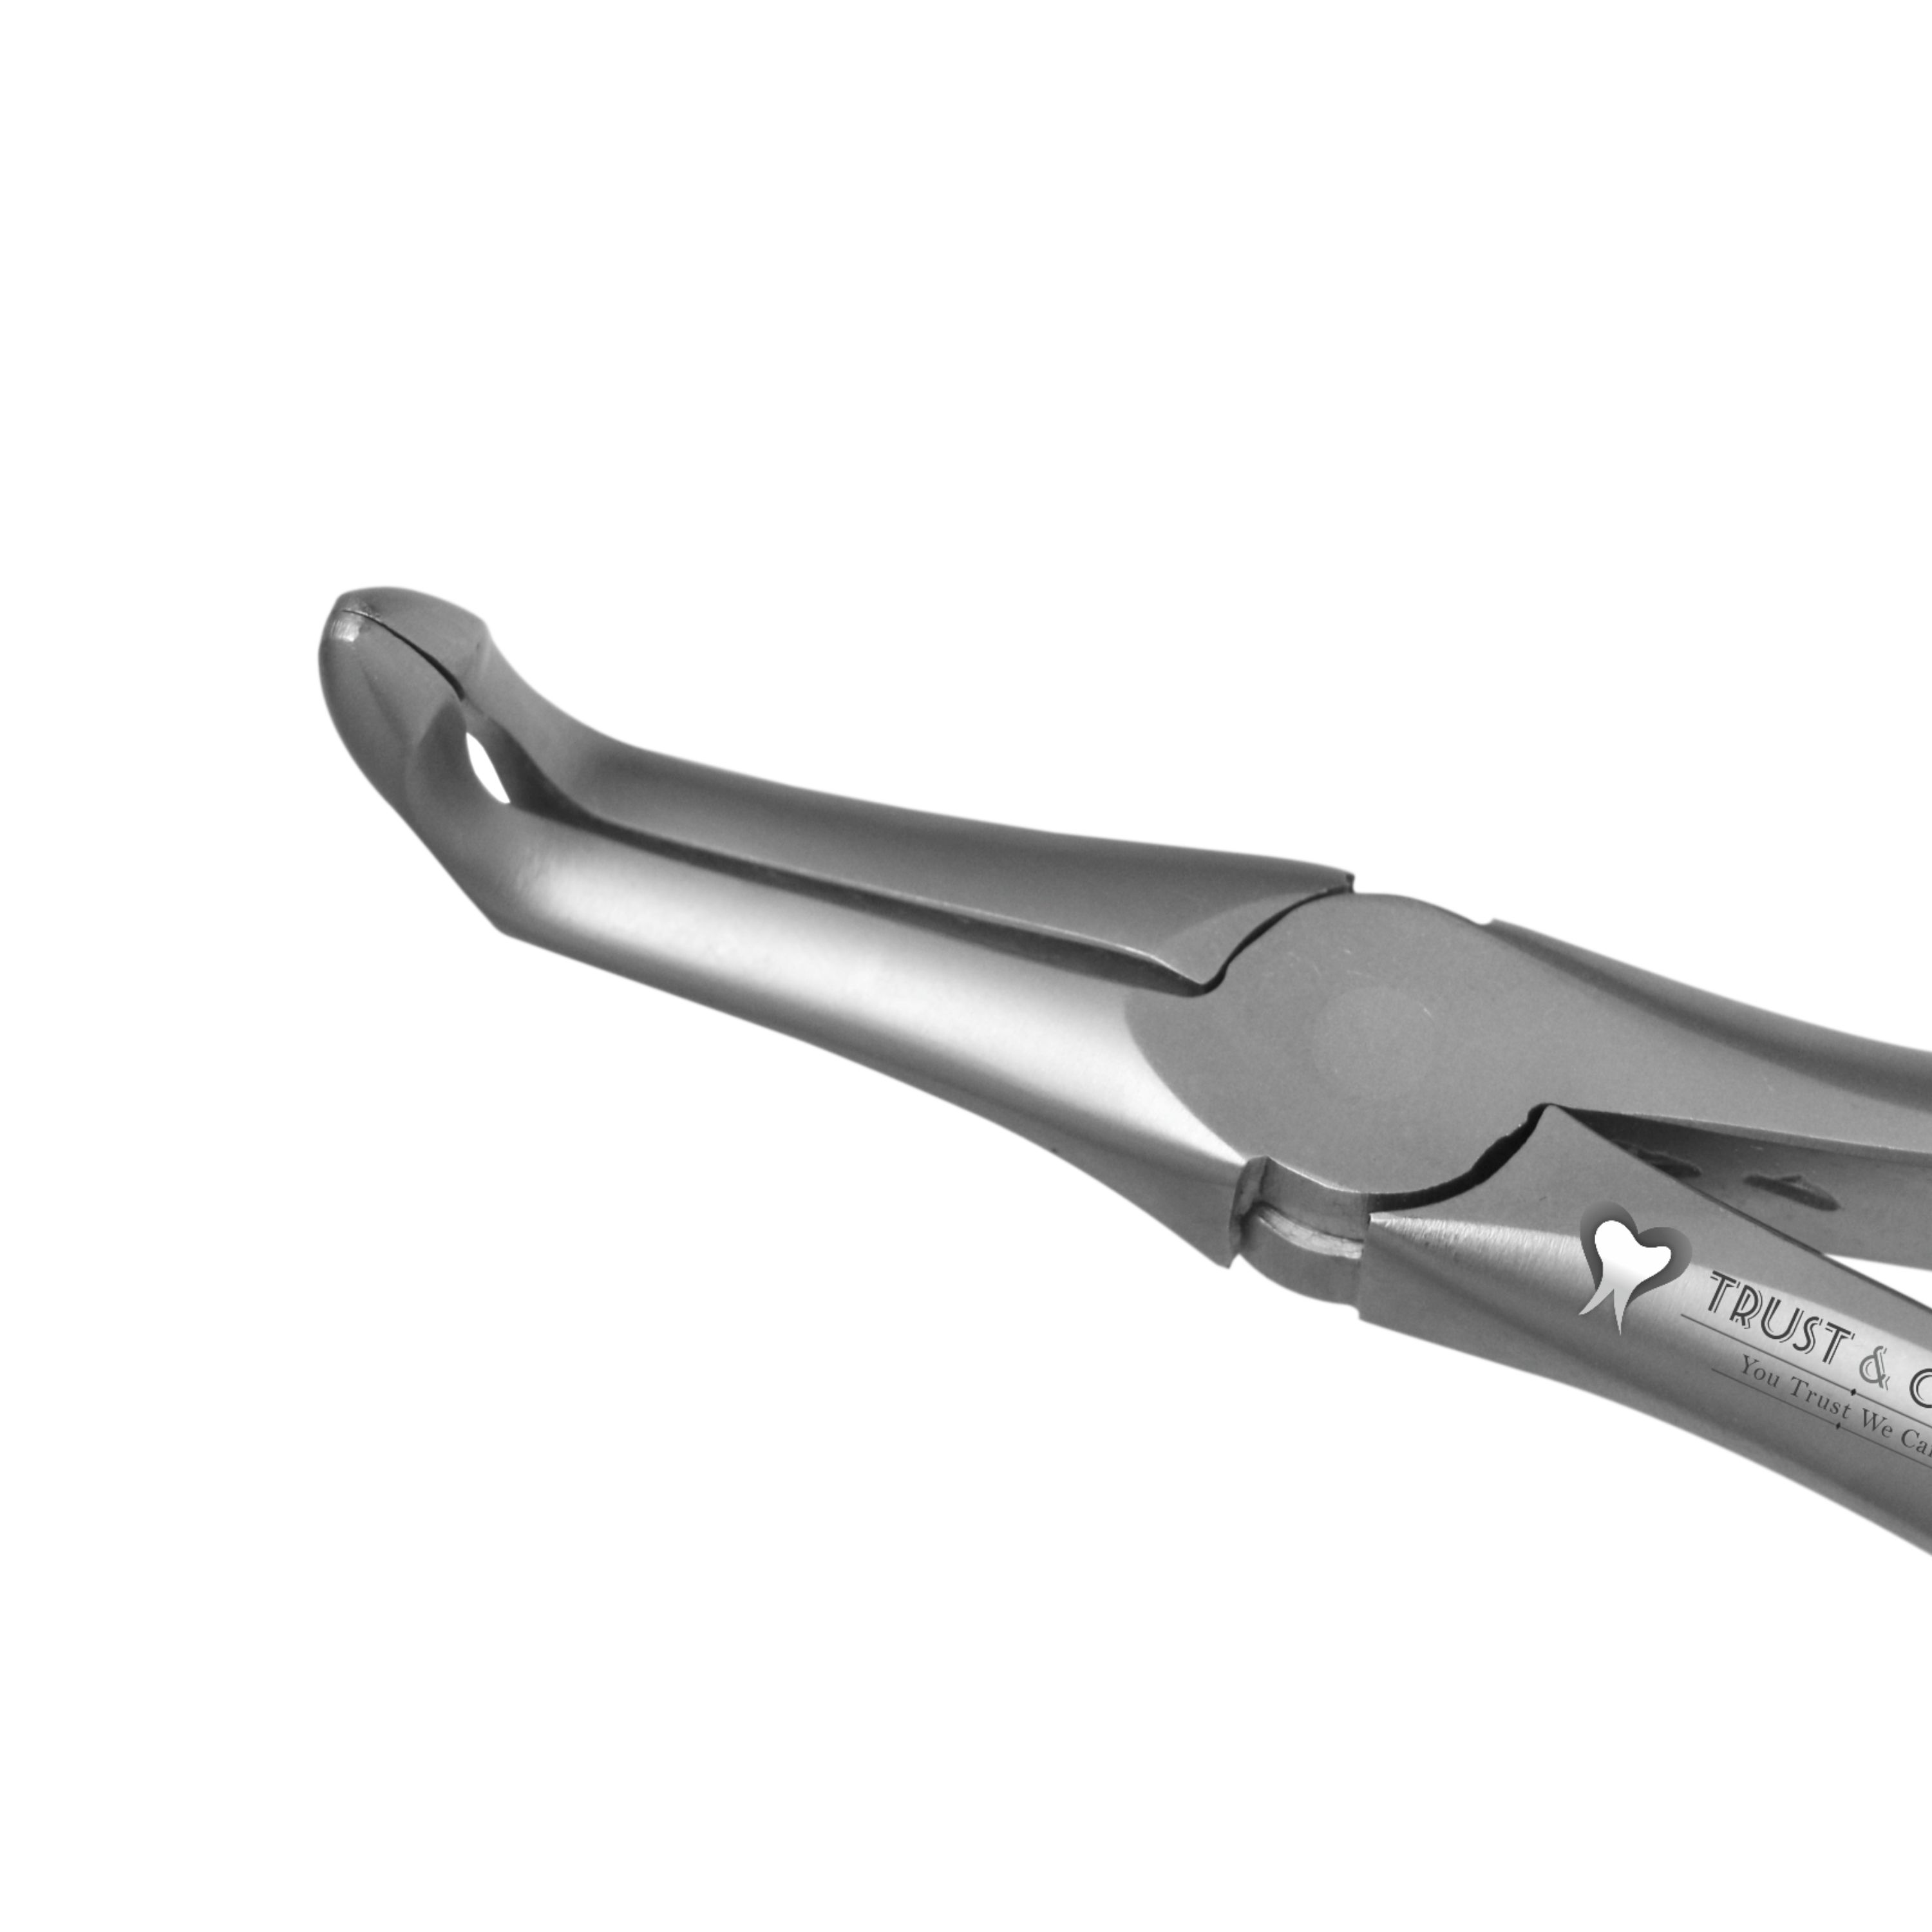 Trust & Care Secure Forcep Lower Roots Fig No. 945.00